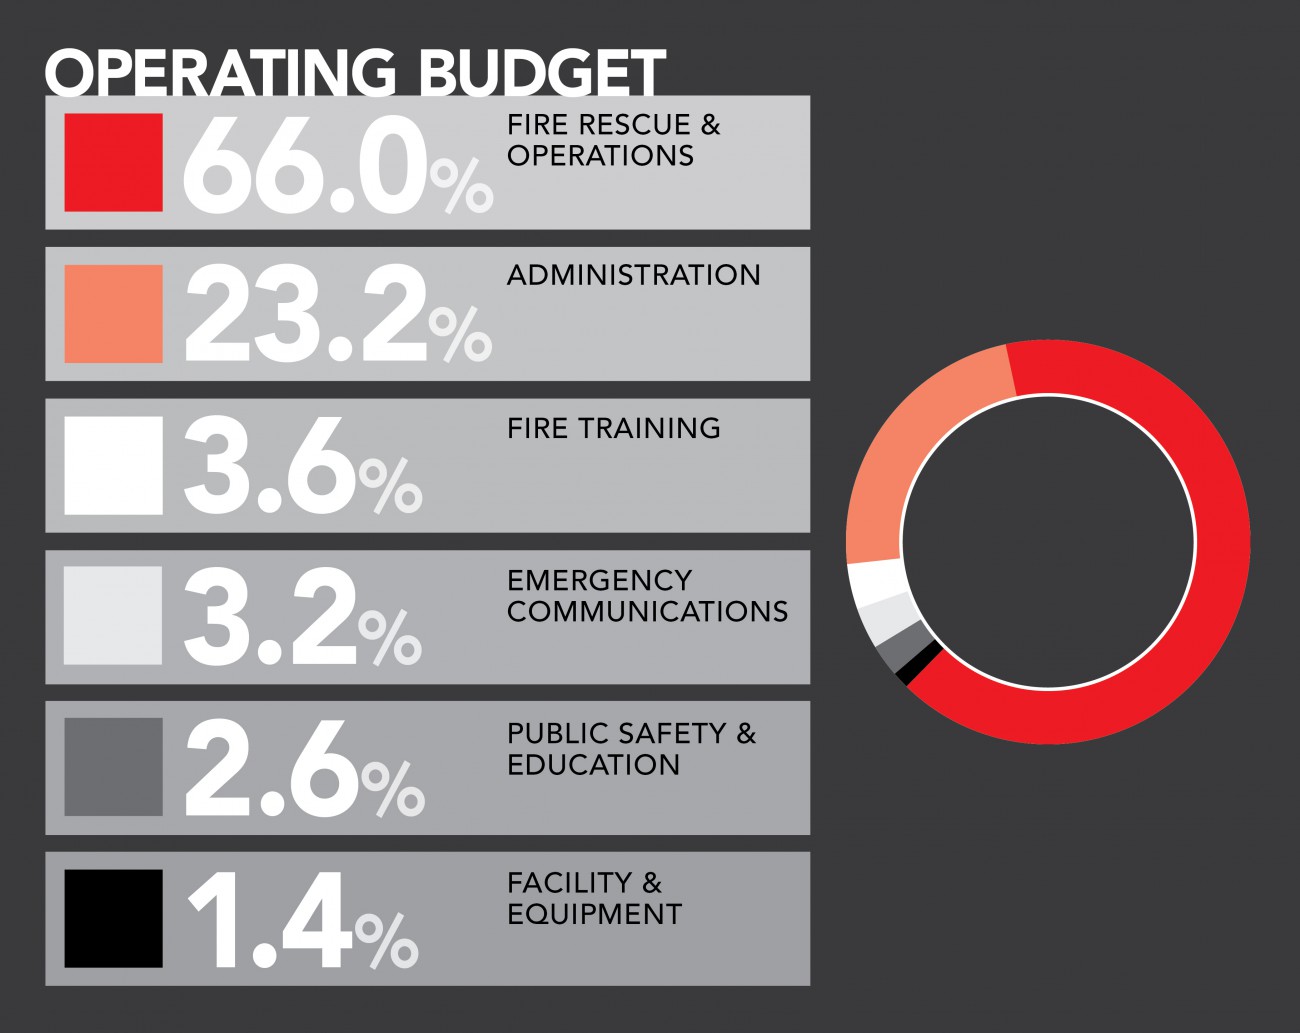 Infographic: Operating budget: operations 66%, administration 23.2%, facility and equipment, 1.4%, public safety and education, 2.6%, emergency communications 3.2%, fire training 3.6%